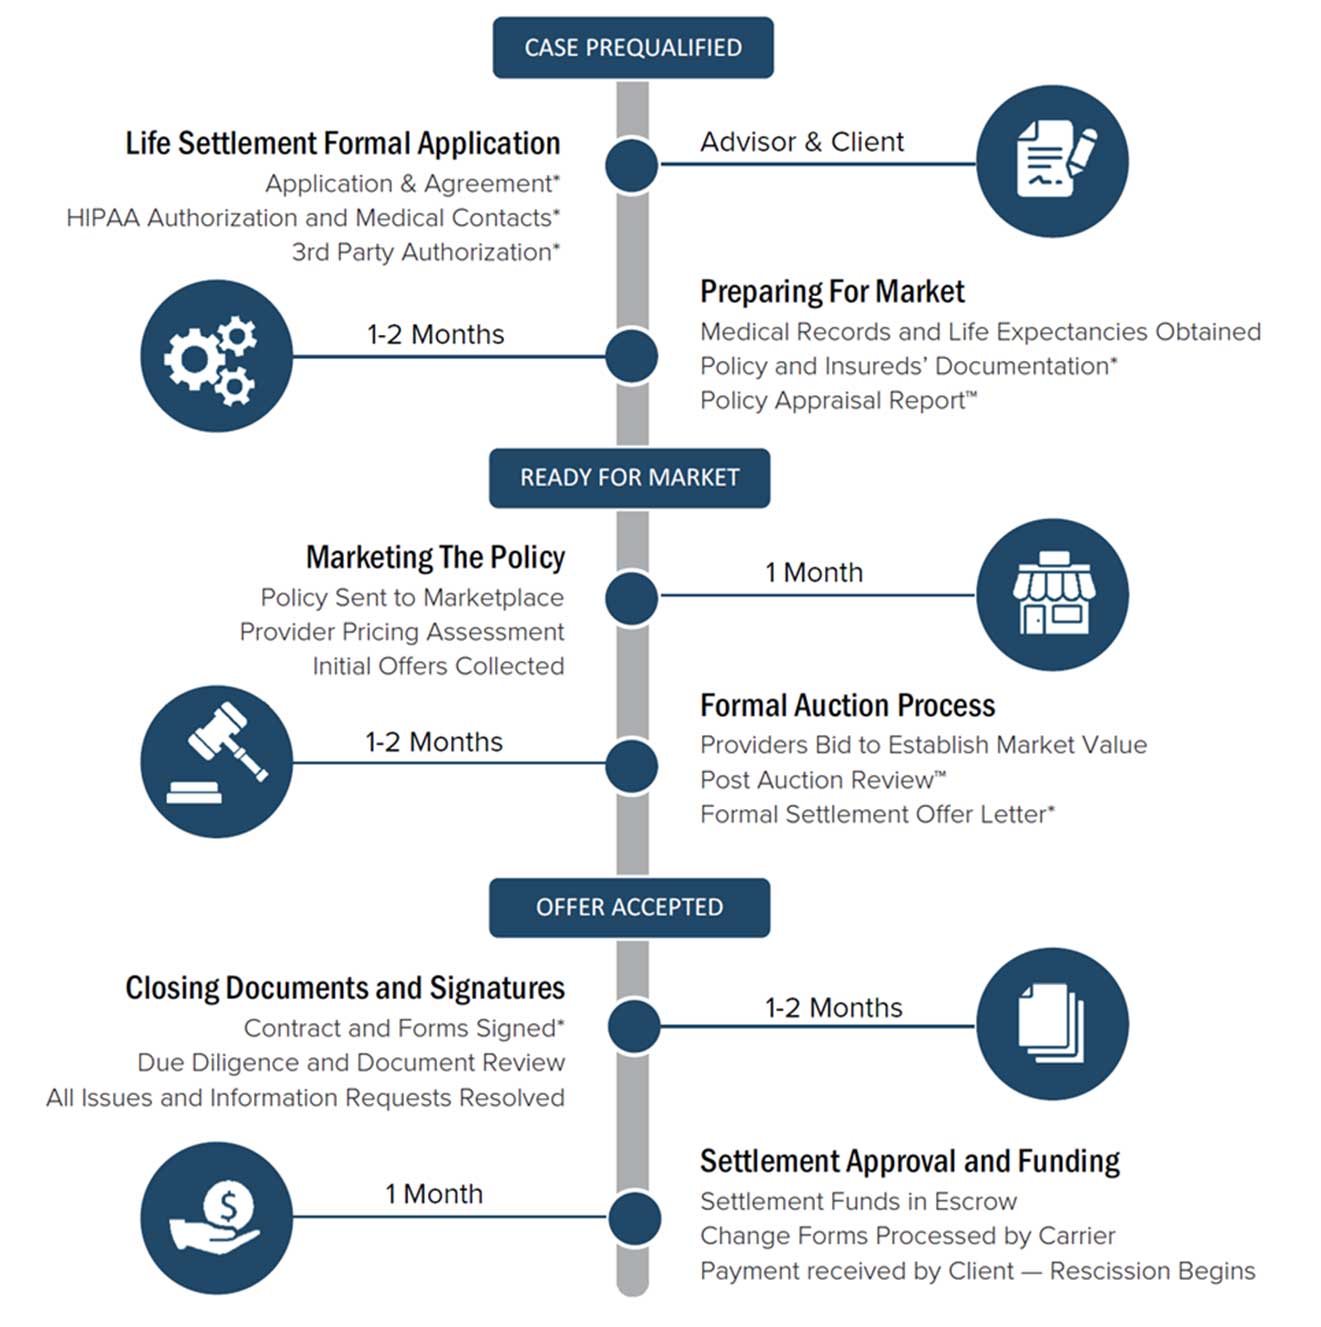 Life Settlement Process and Timeline